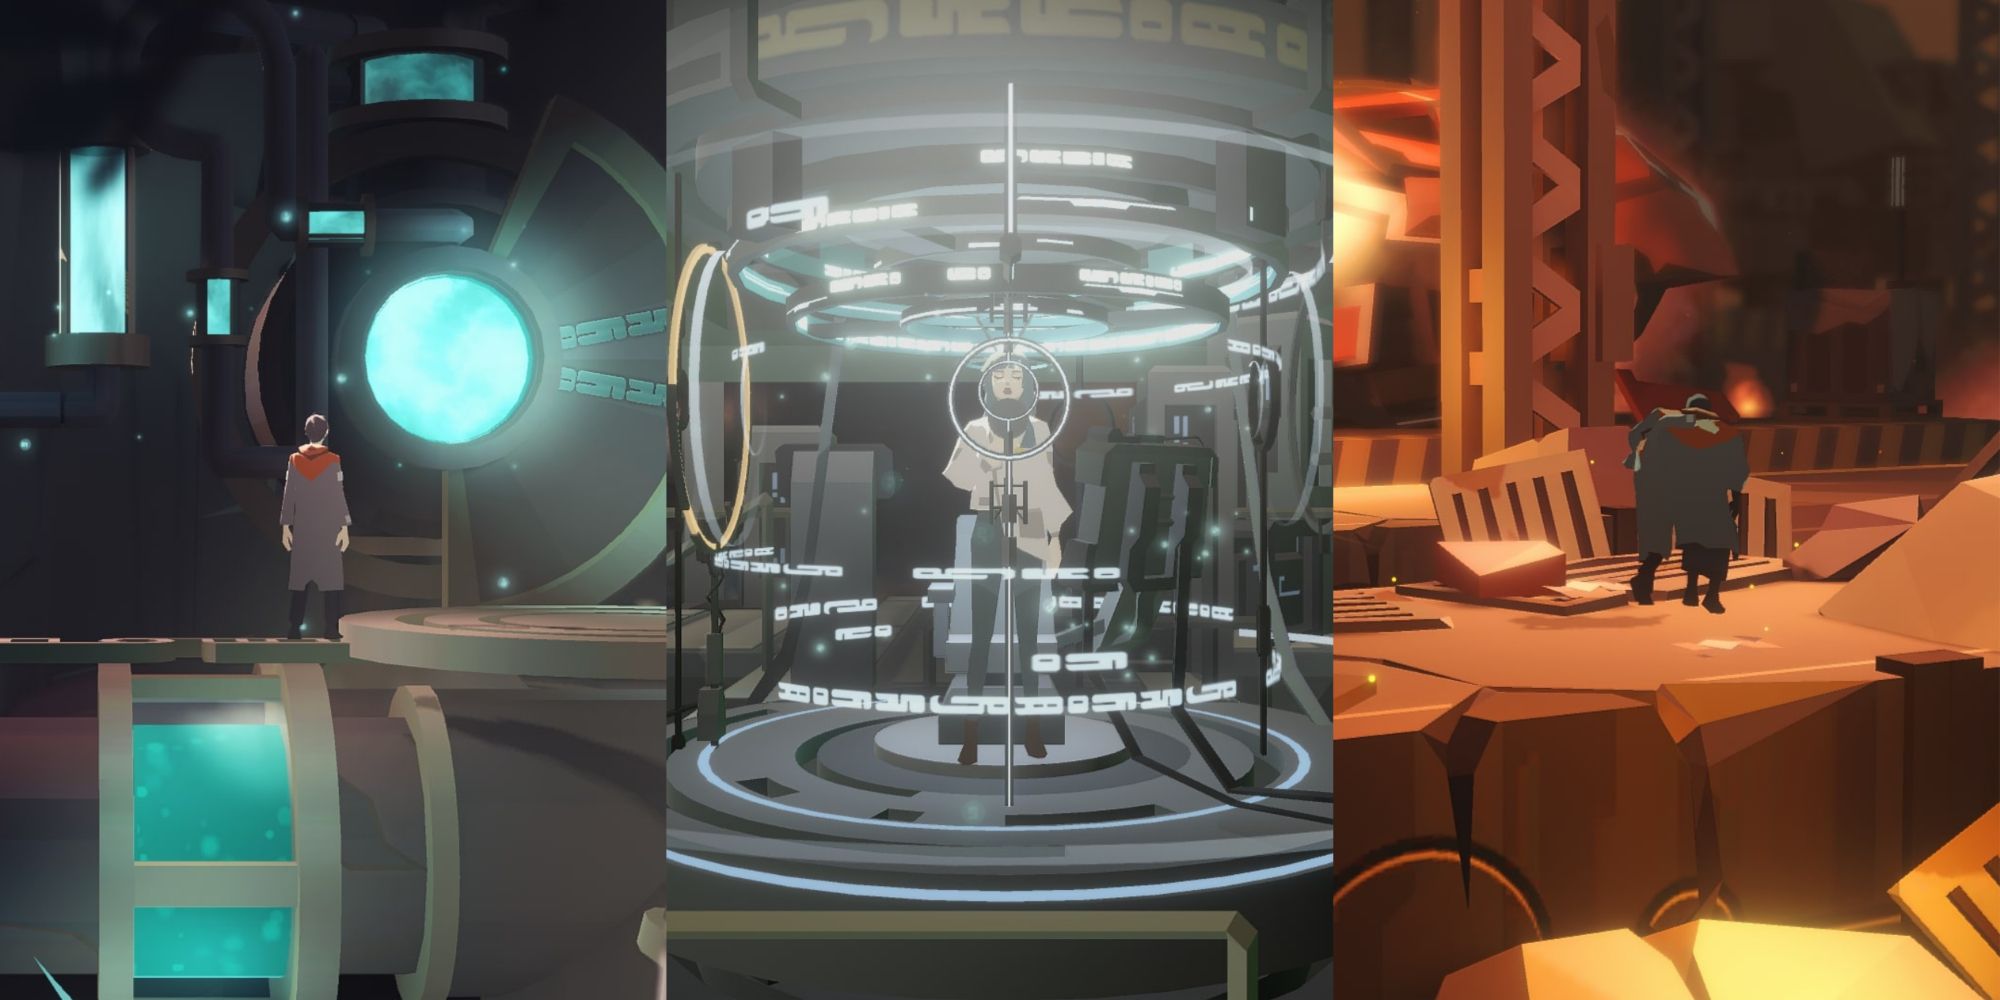 OPUS starsong three images Jun looking into lumen tank, Eda singing, Jun rescuing his guardian from fire cave